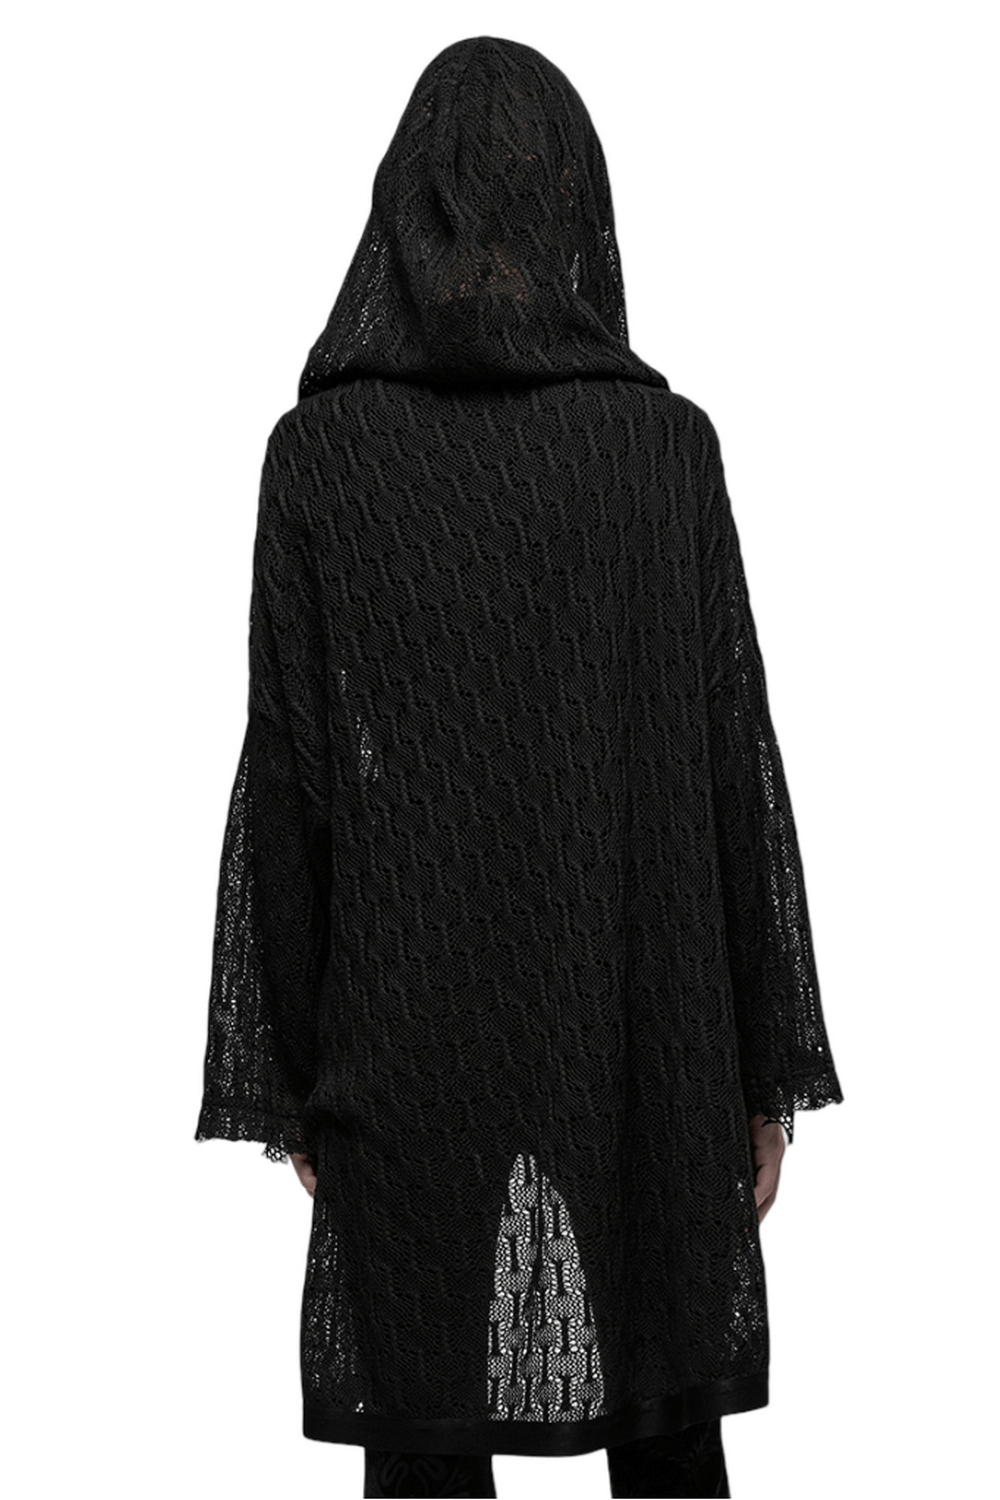 Lace-Detailed Gothic Cape with Horn Buckle for Women